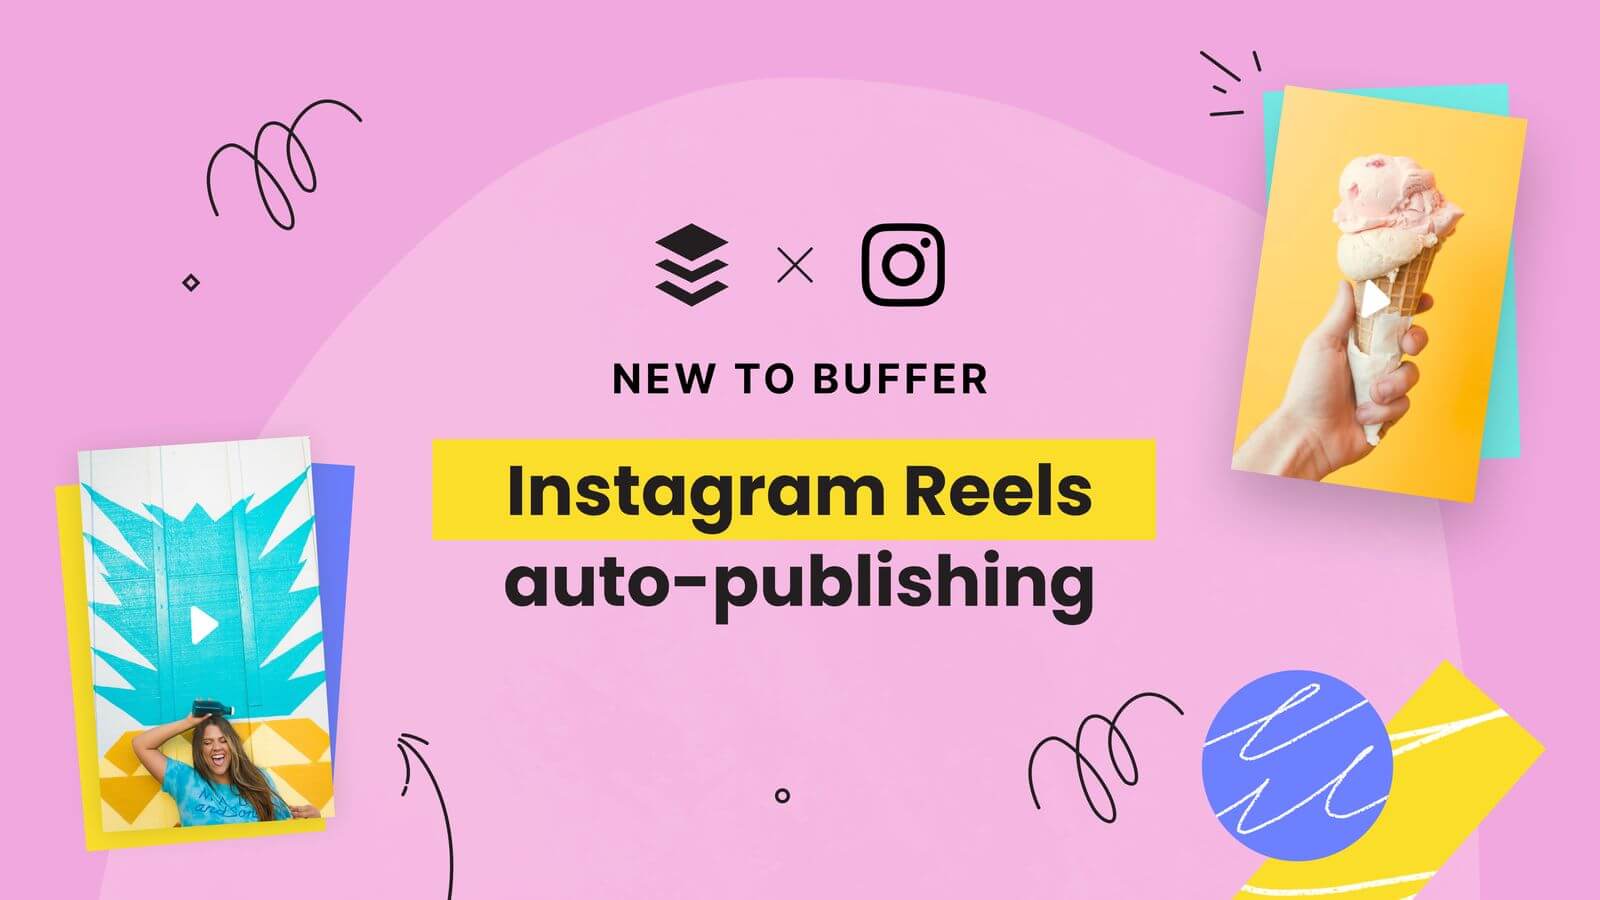 Introducing Instagram Reels Auto-Publishing in Buffer